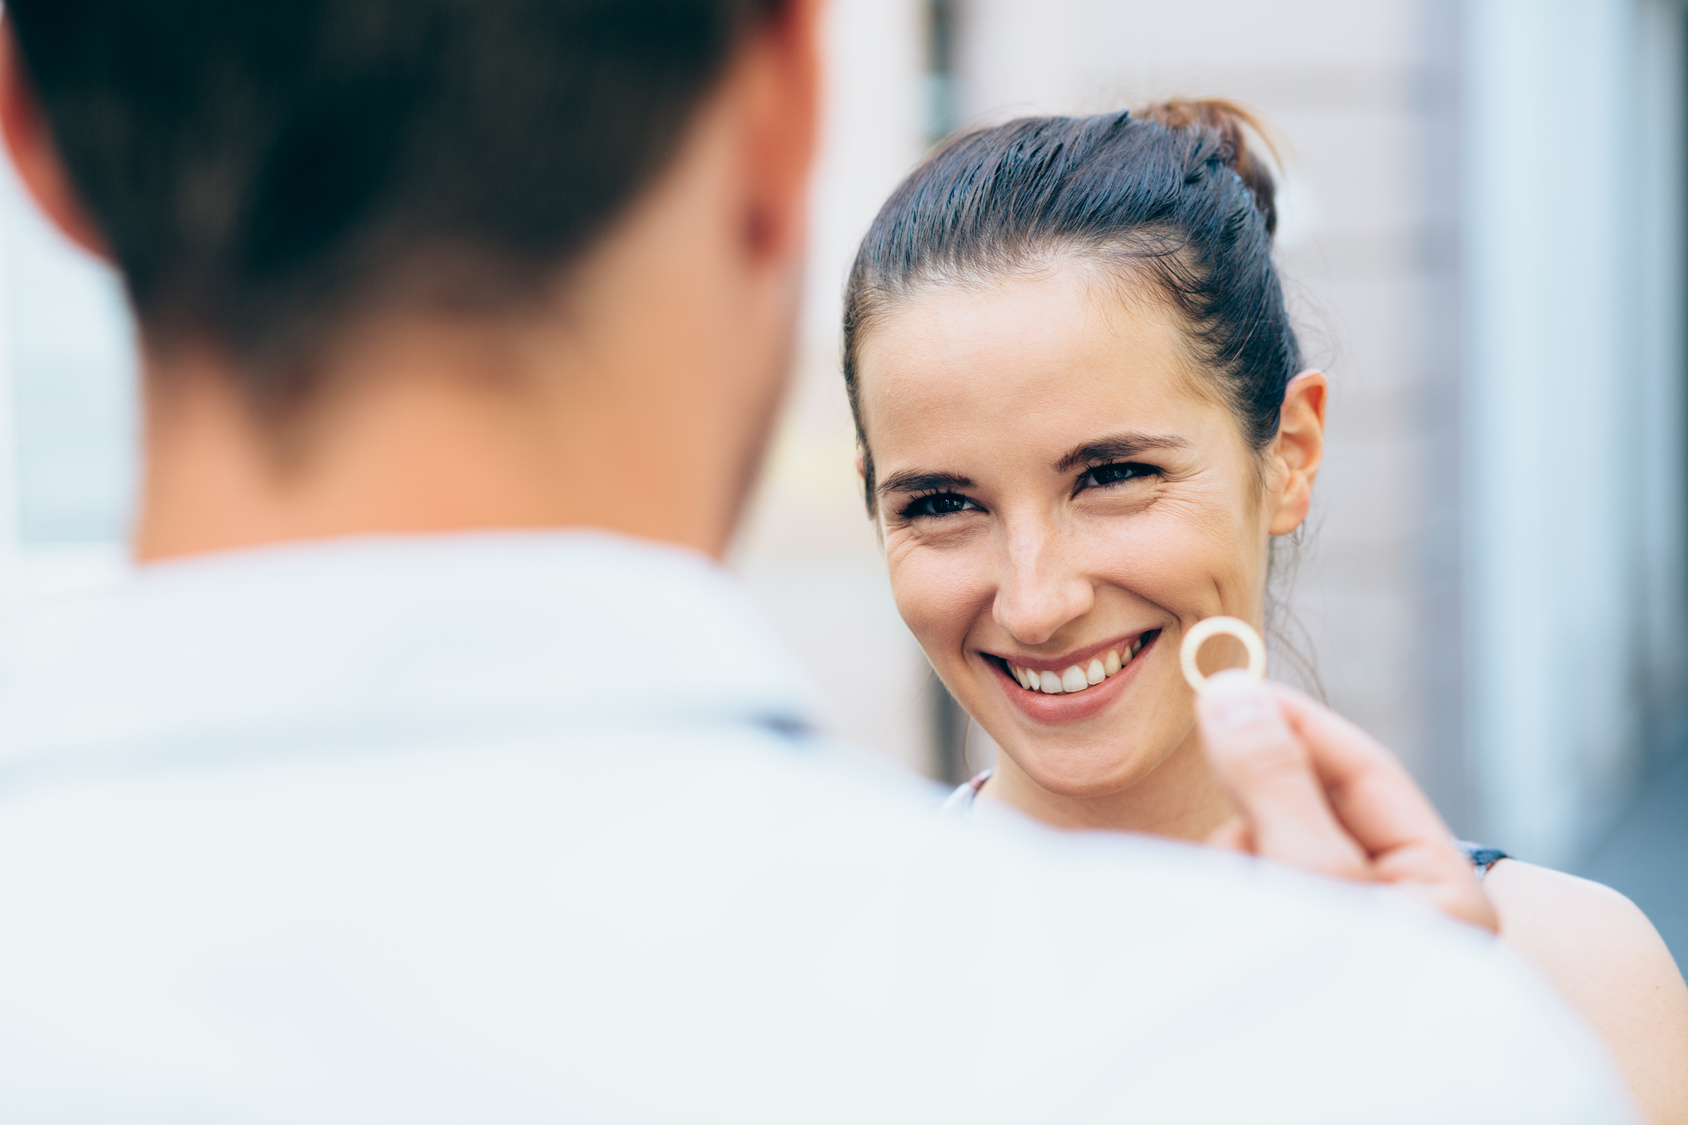 Young woman smiling after engagment proposal